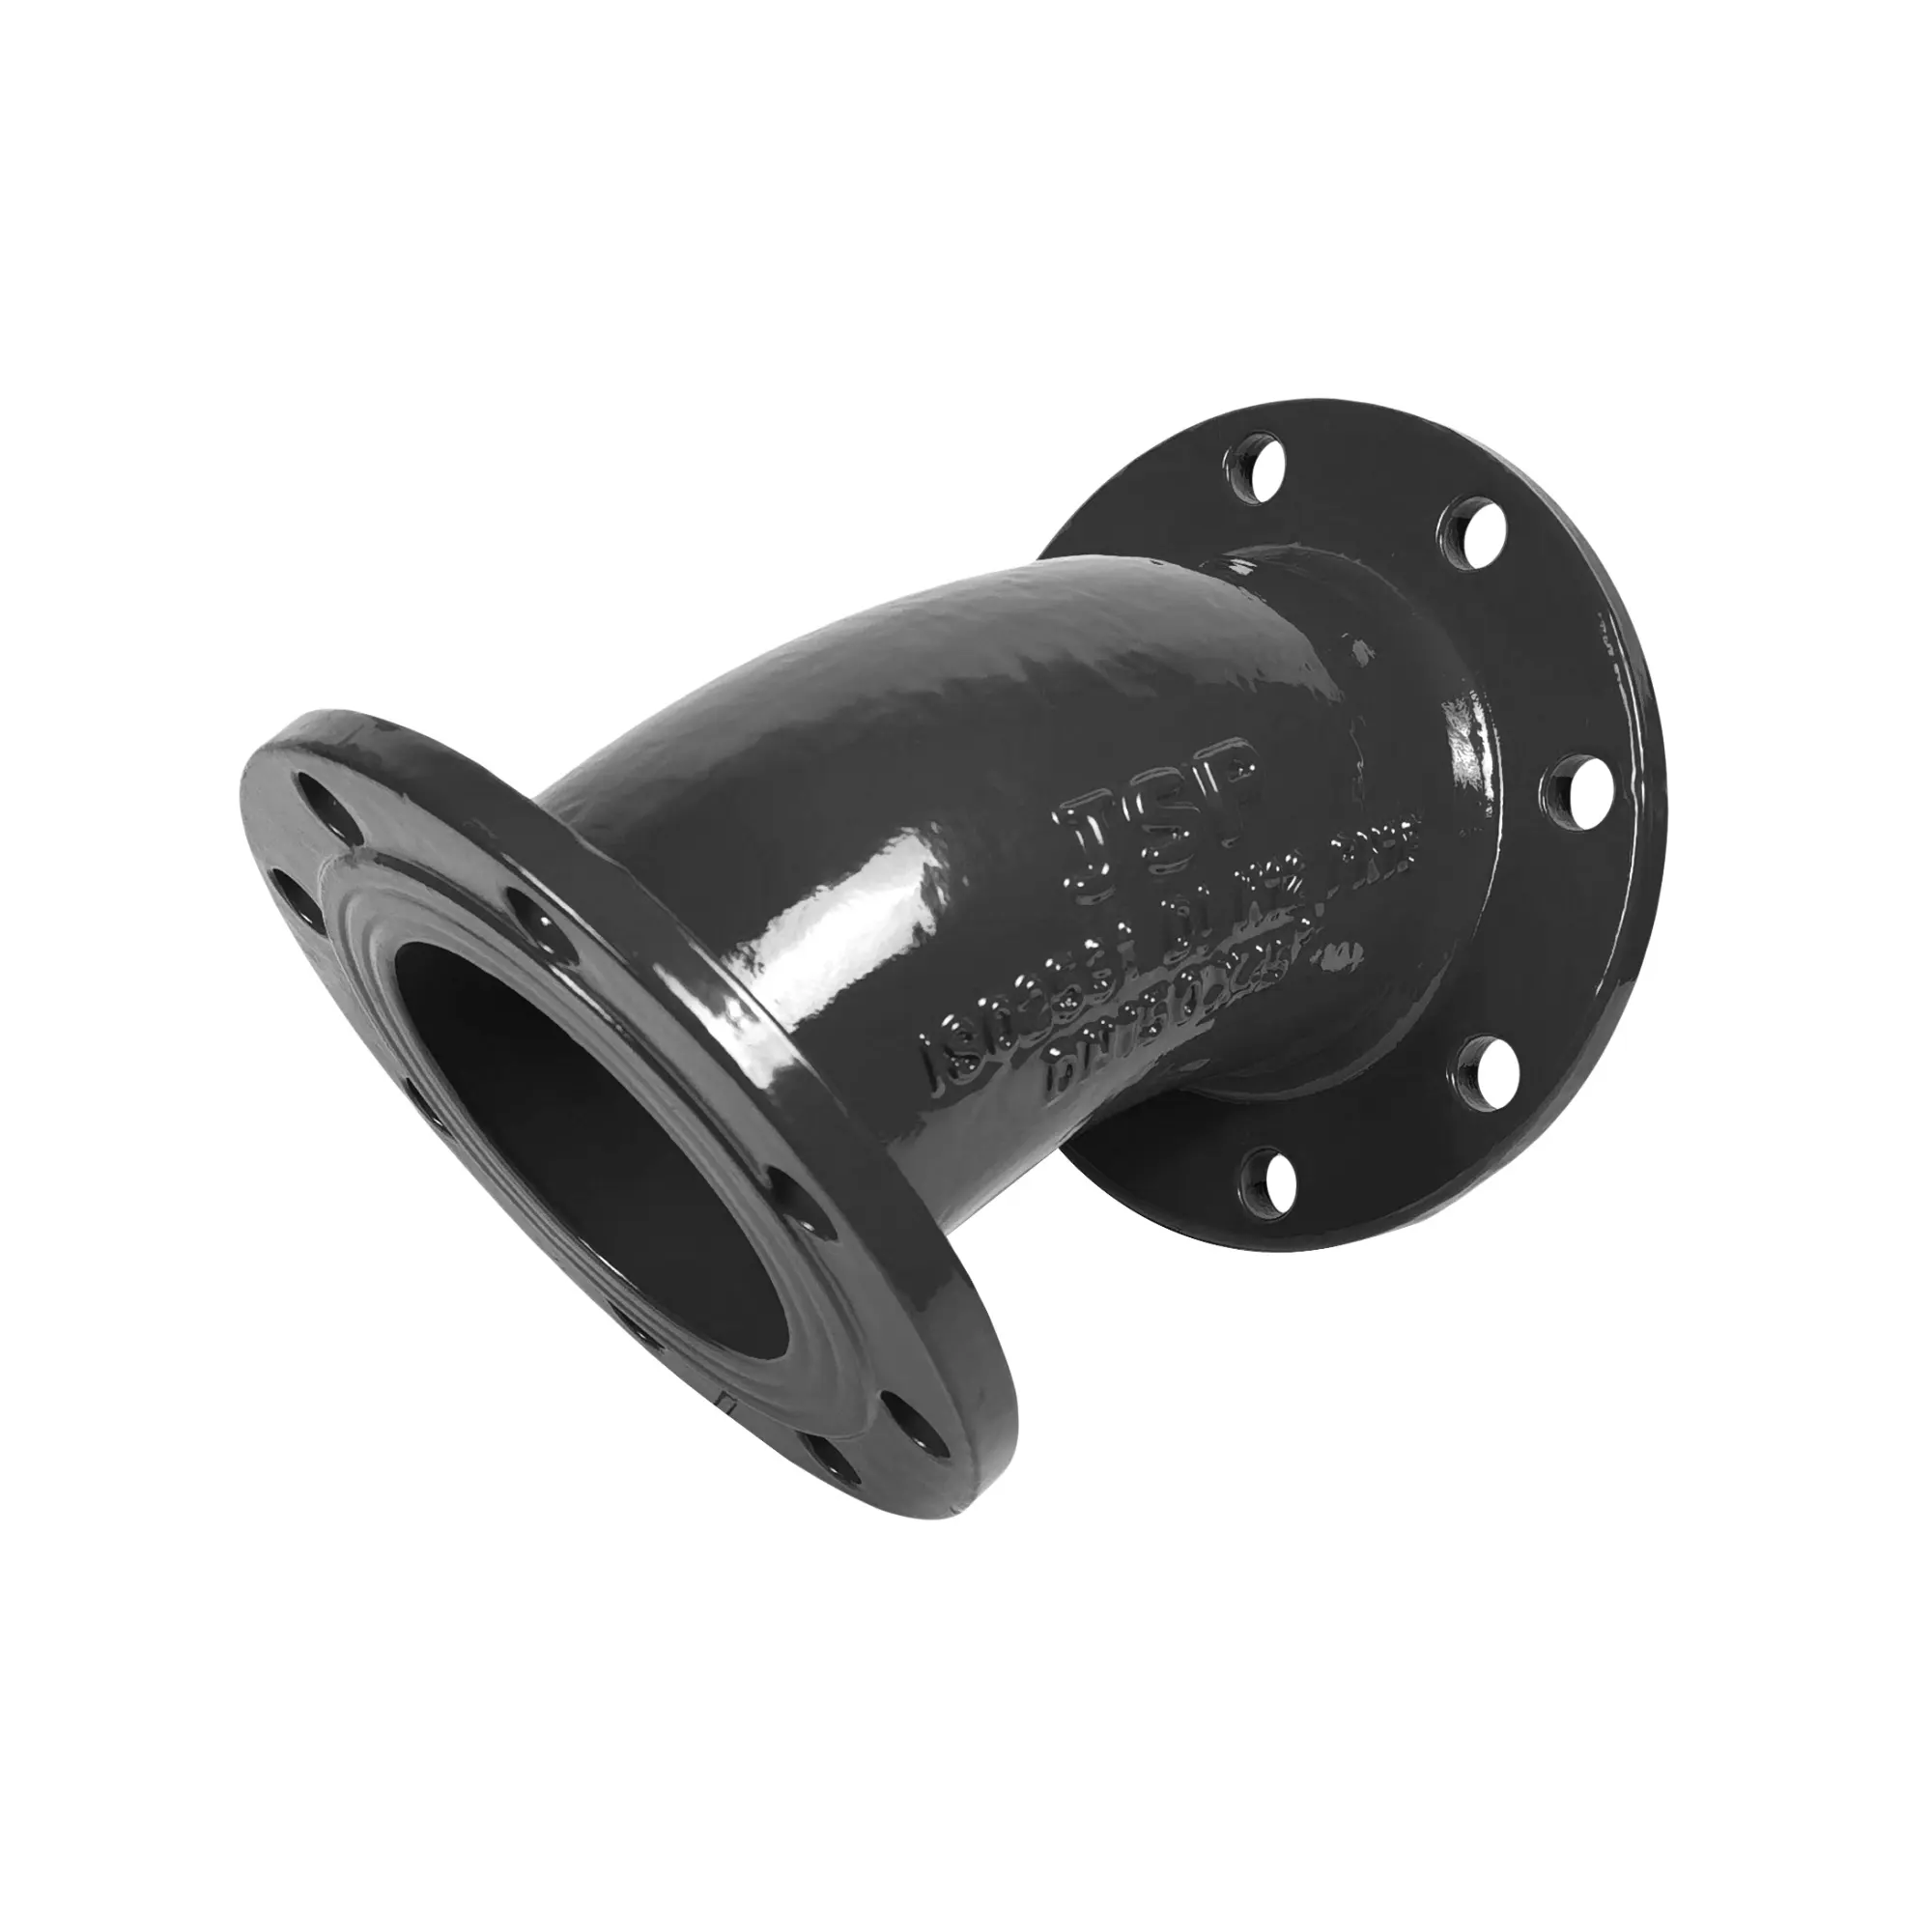 JSP DI Ductile Cast Iron Pipe ISO2531 45 Degree Elbow Hot Product Ductile Iron Fittings Double Flange Bend For Water Pipe